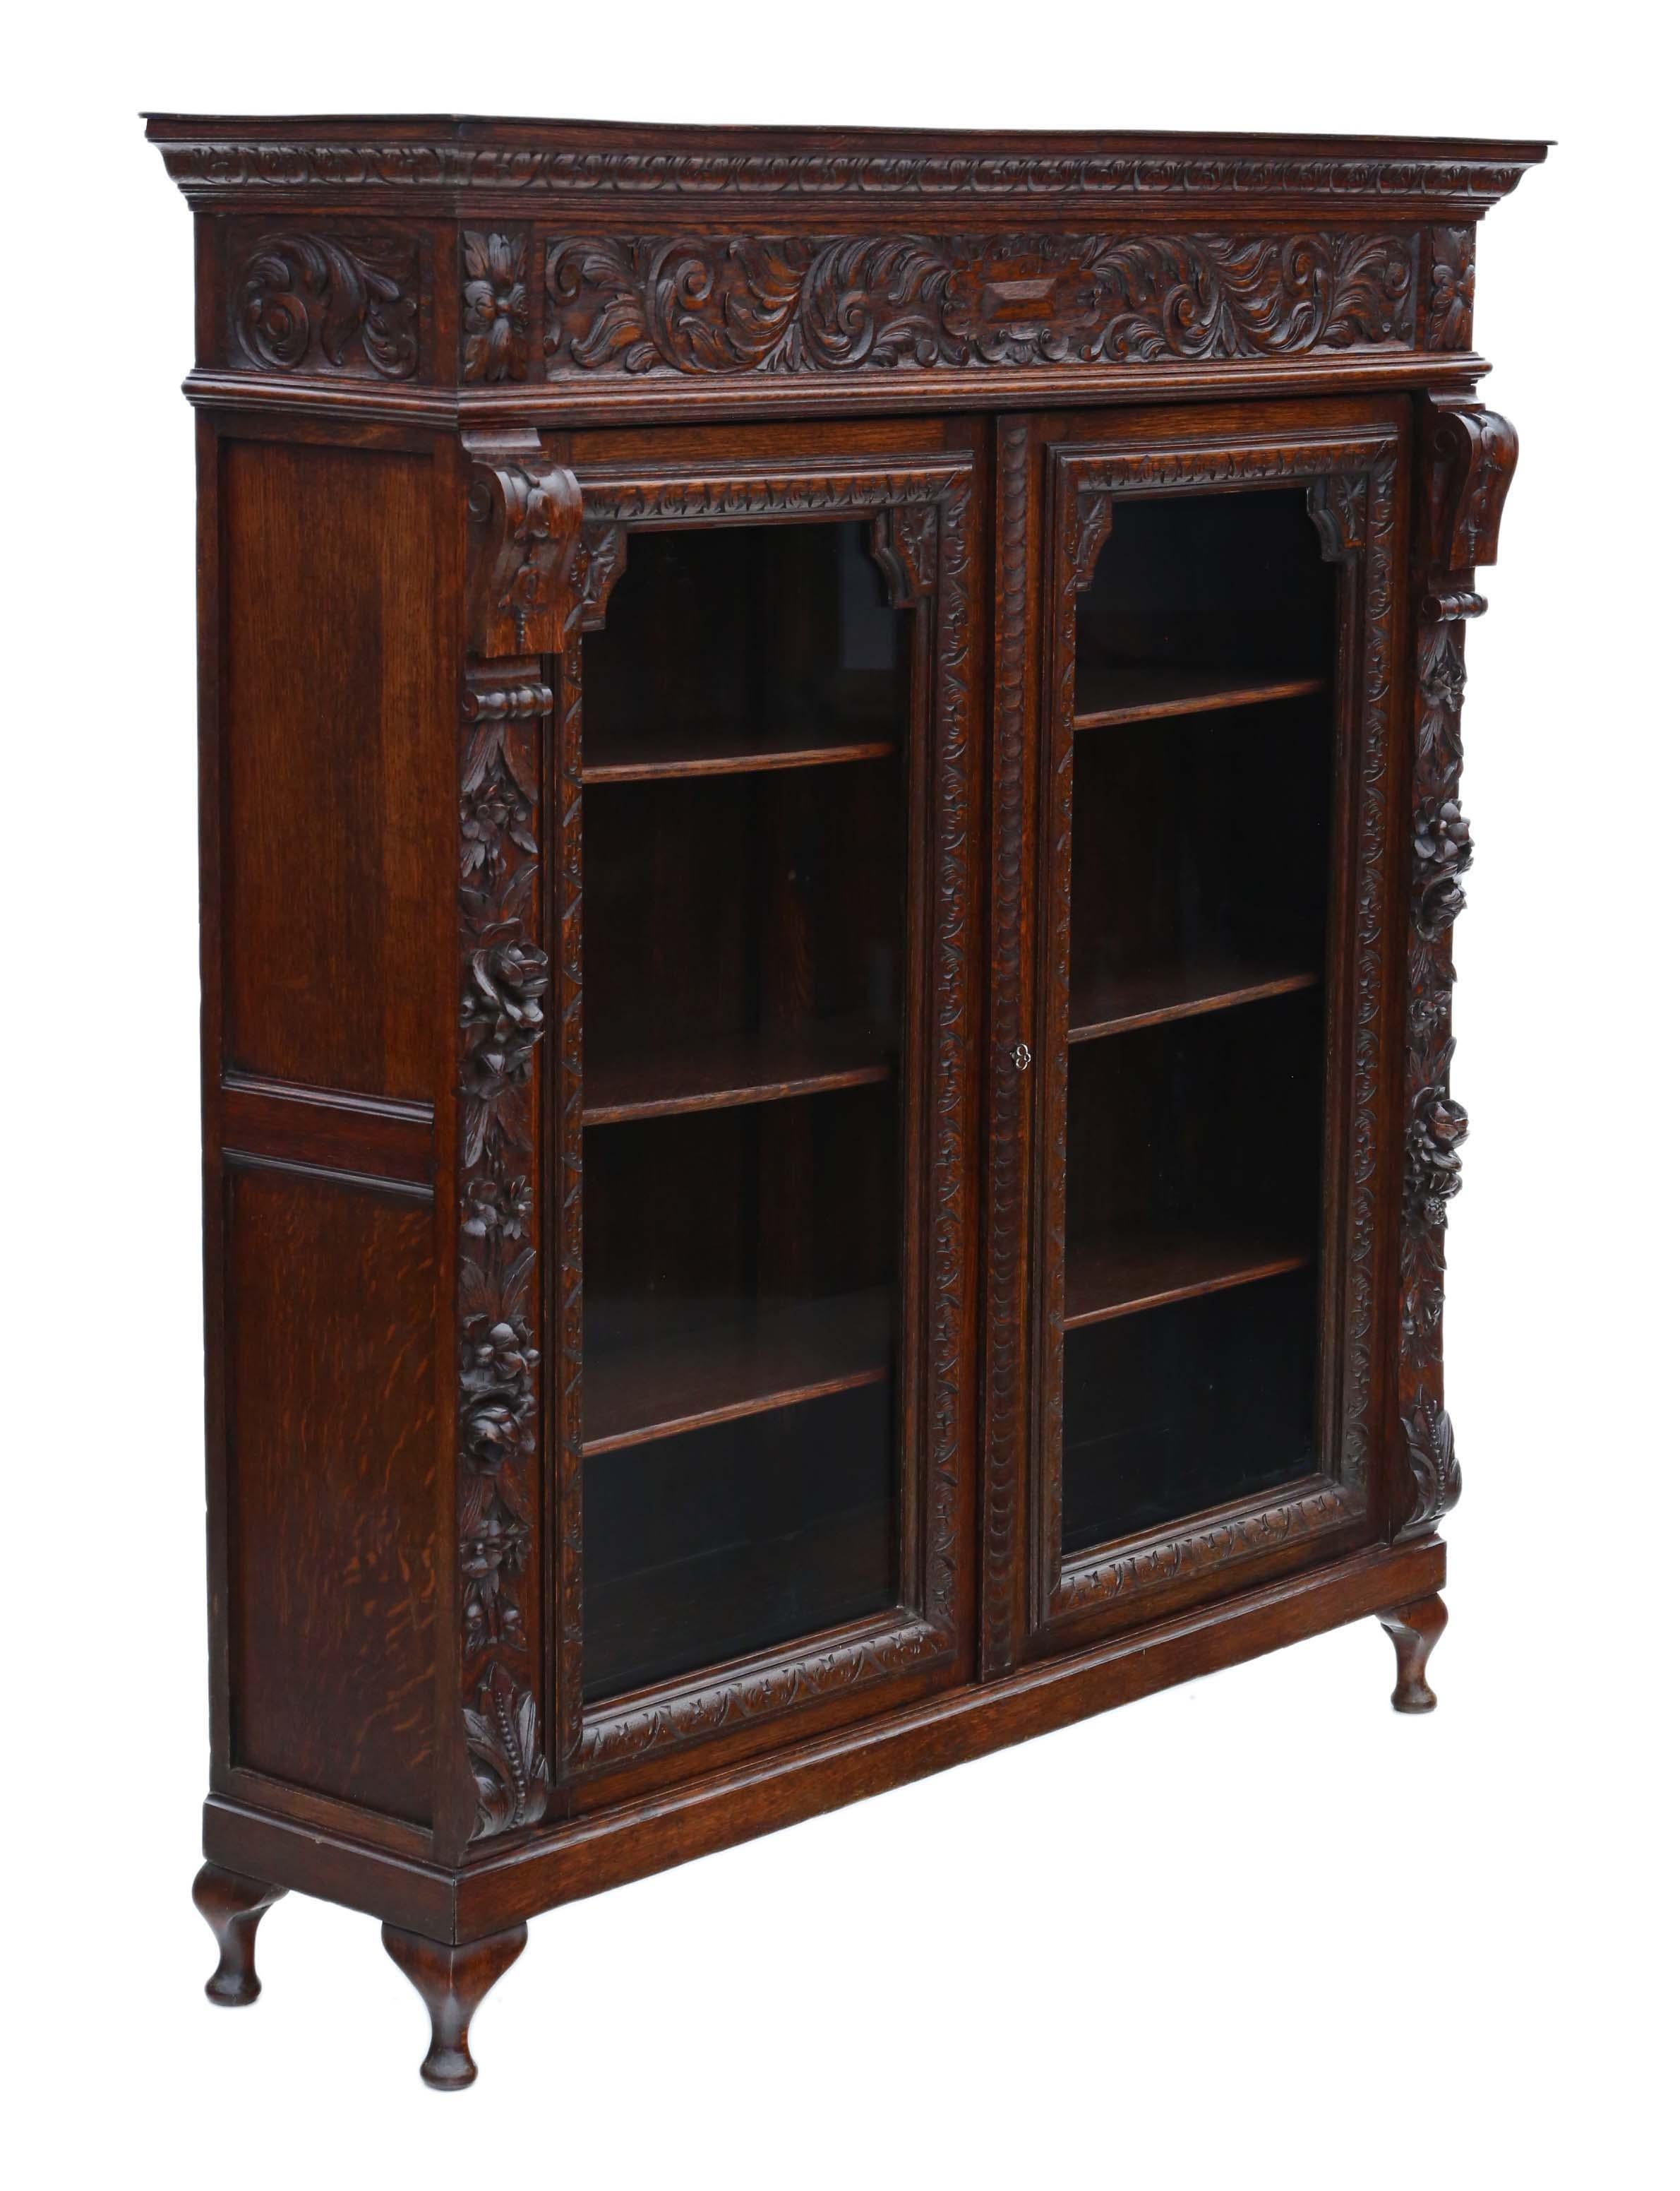 Antique large fine quality 19th century carved oak glazed bookcase C1895.

This is a lovely quality bookcase, that is full of age, charm and character.

Solid, with no loose joints and no woodworm.

The shelves are held in place by pinned in